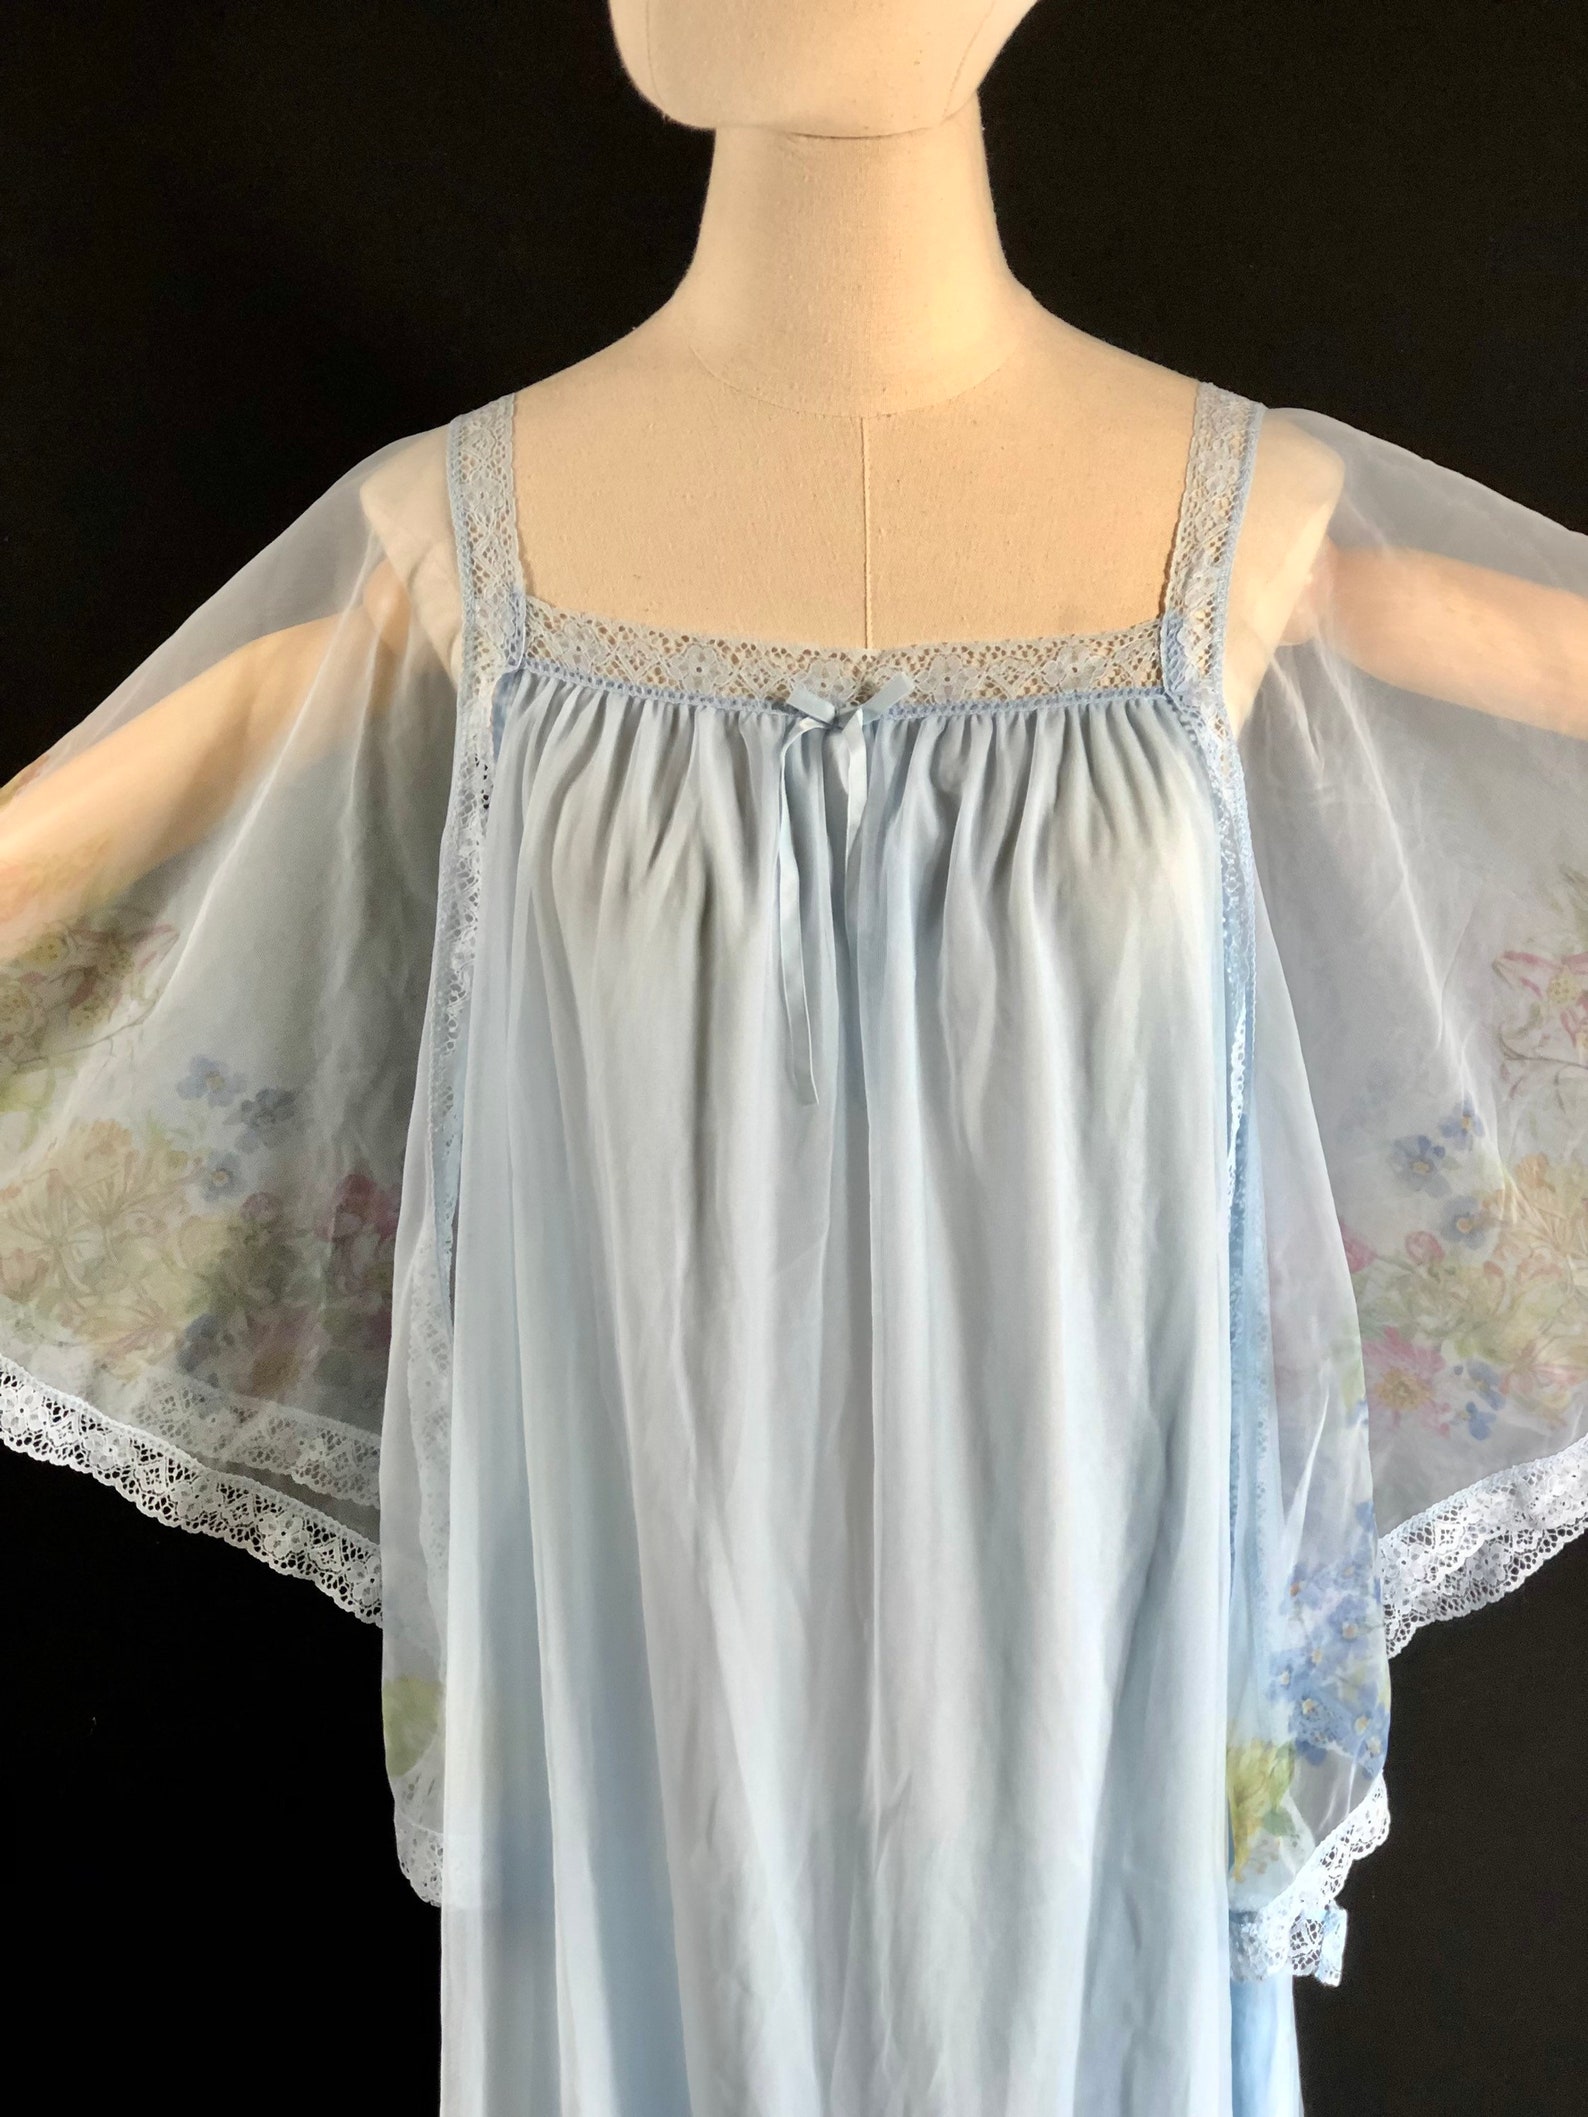 Vintage 1970s nightgown / ST MICHAEL loose house dress / blue | Etsy